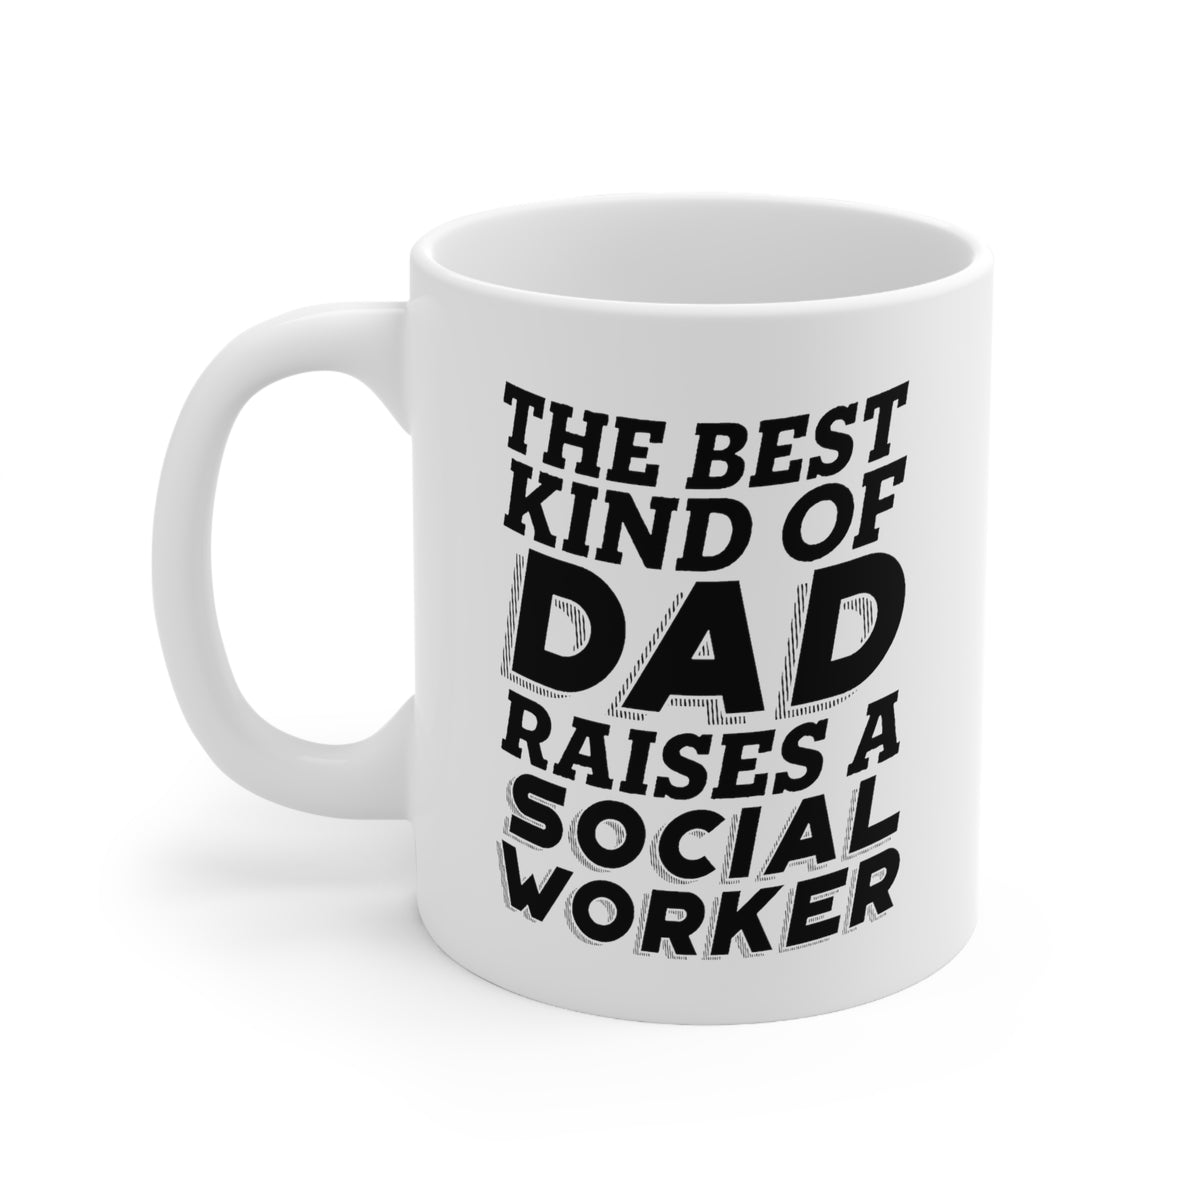 Social worker Dad Gifts - The Best Kind of Dad Raises A Social worker White Coffee Mug, Tea Cup